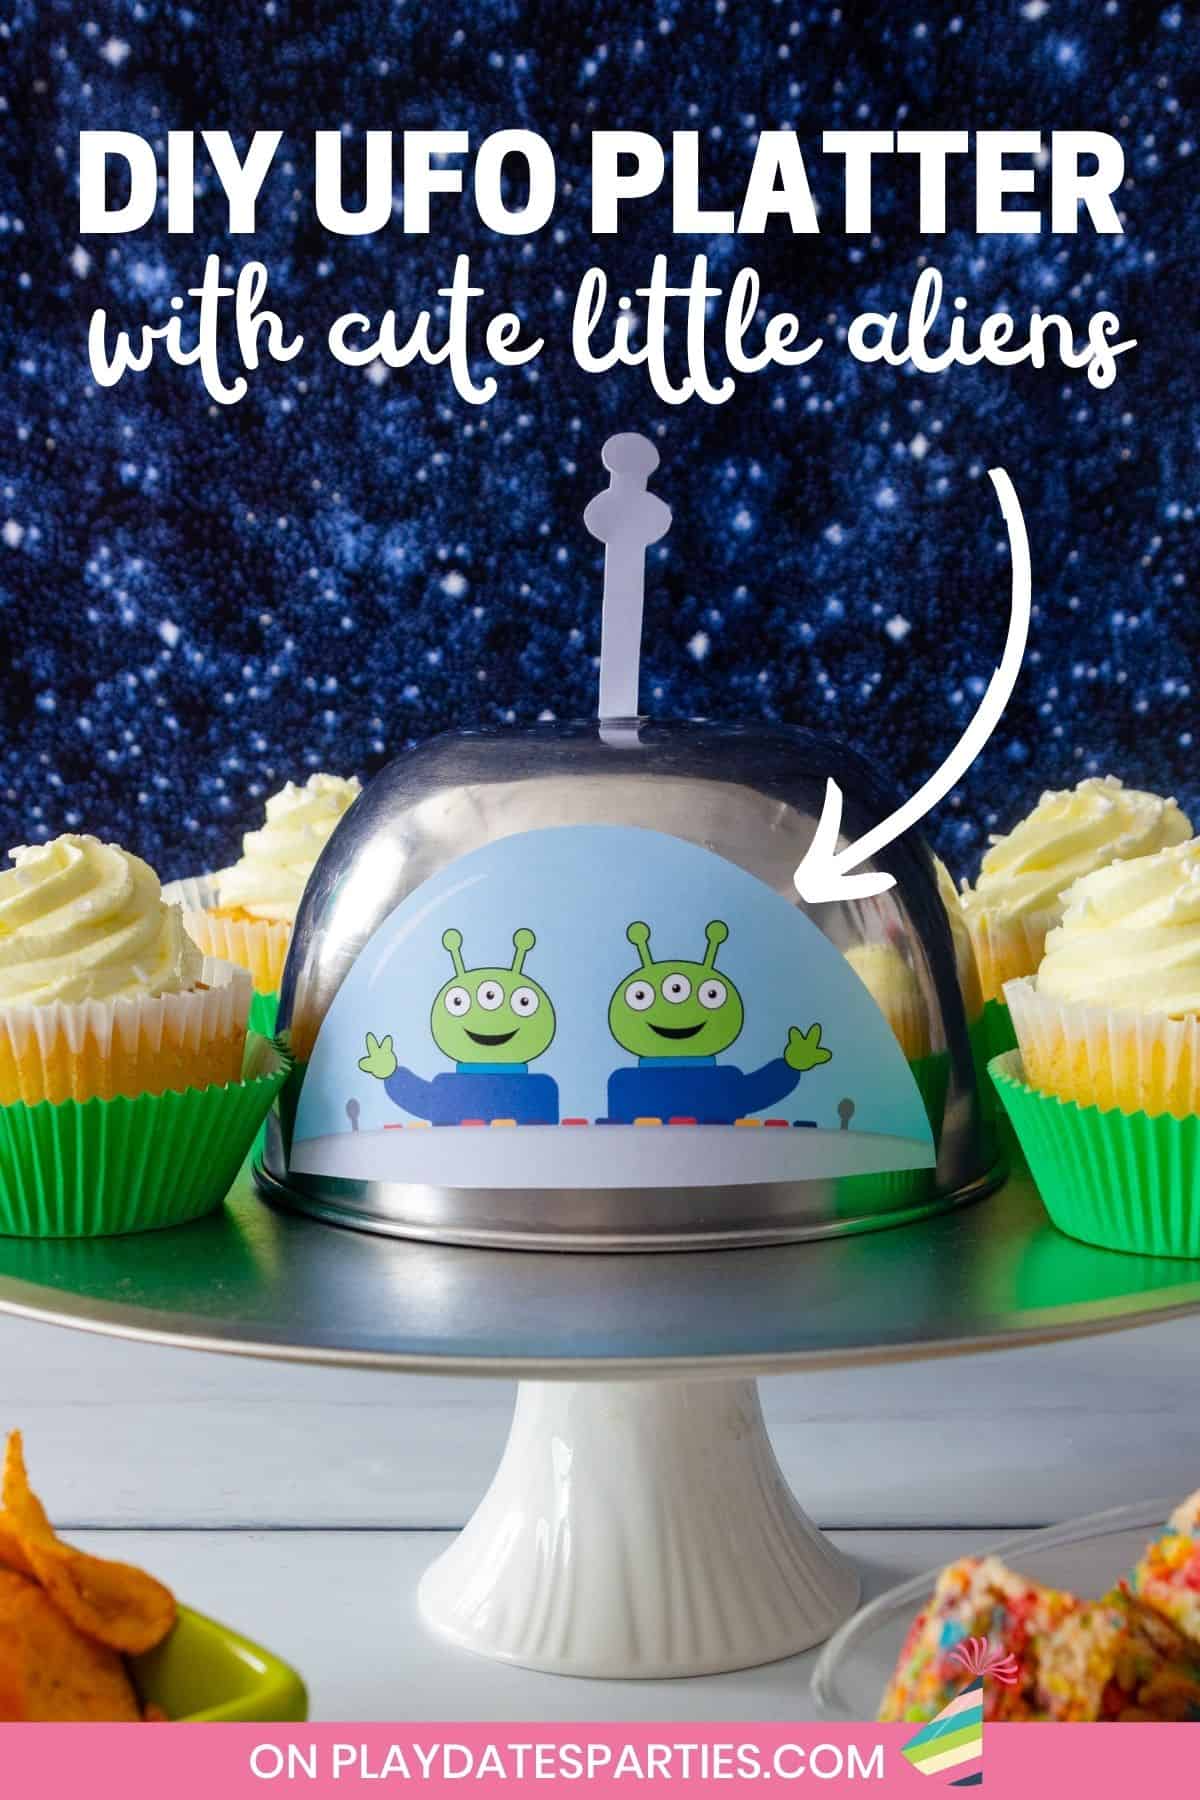 Front view of a party platter decorated to look like a UFO with cute aliens looking out a window.